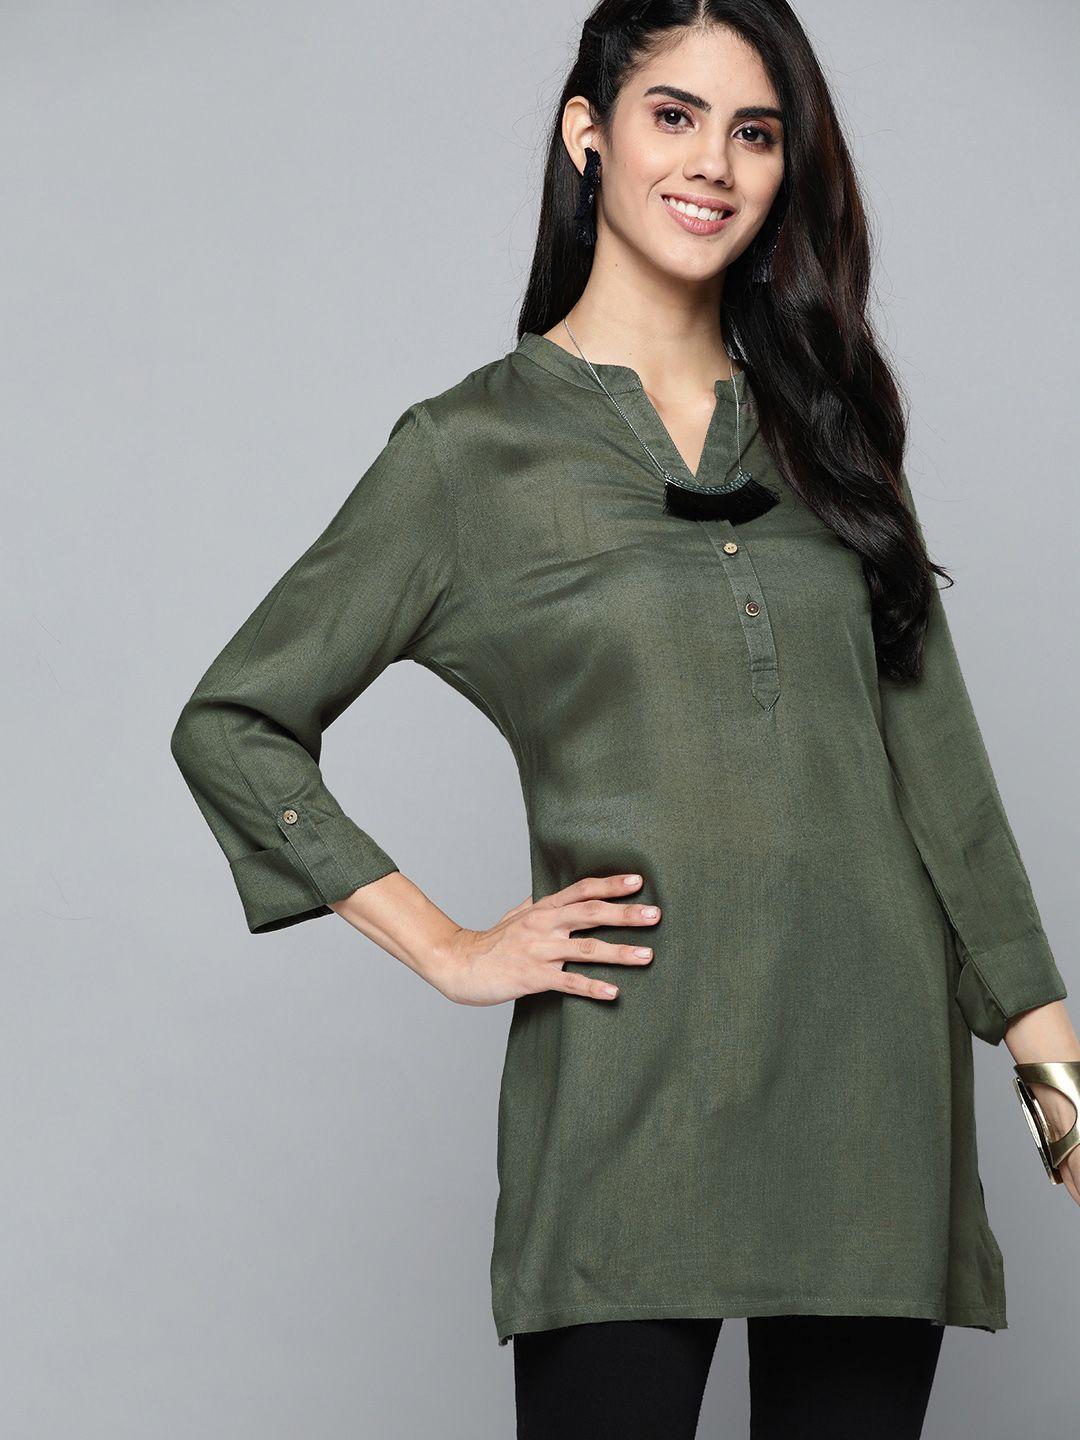 here&now-women-olive-green-solid-kurti